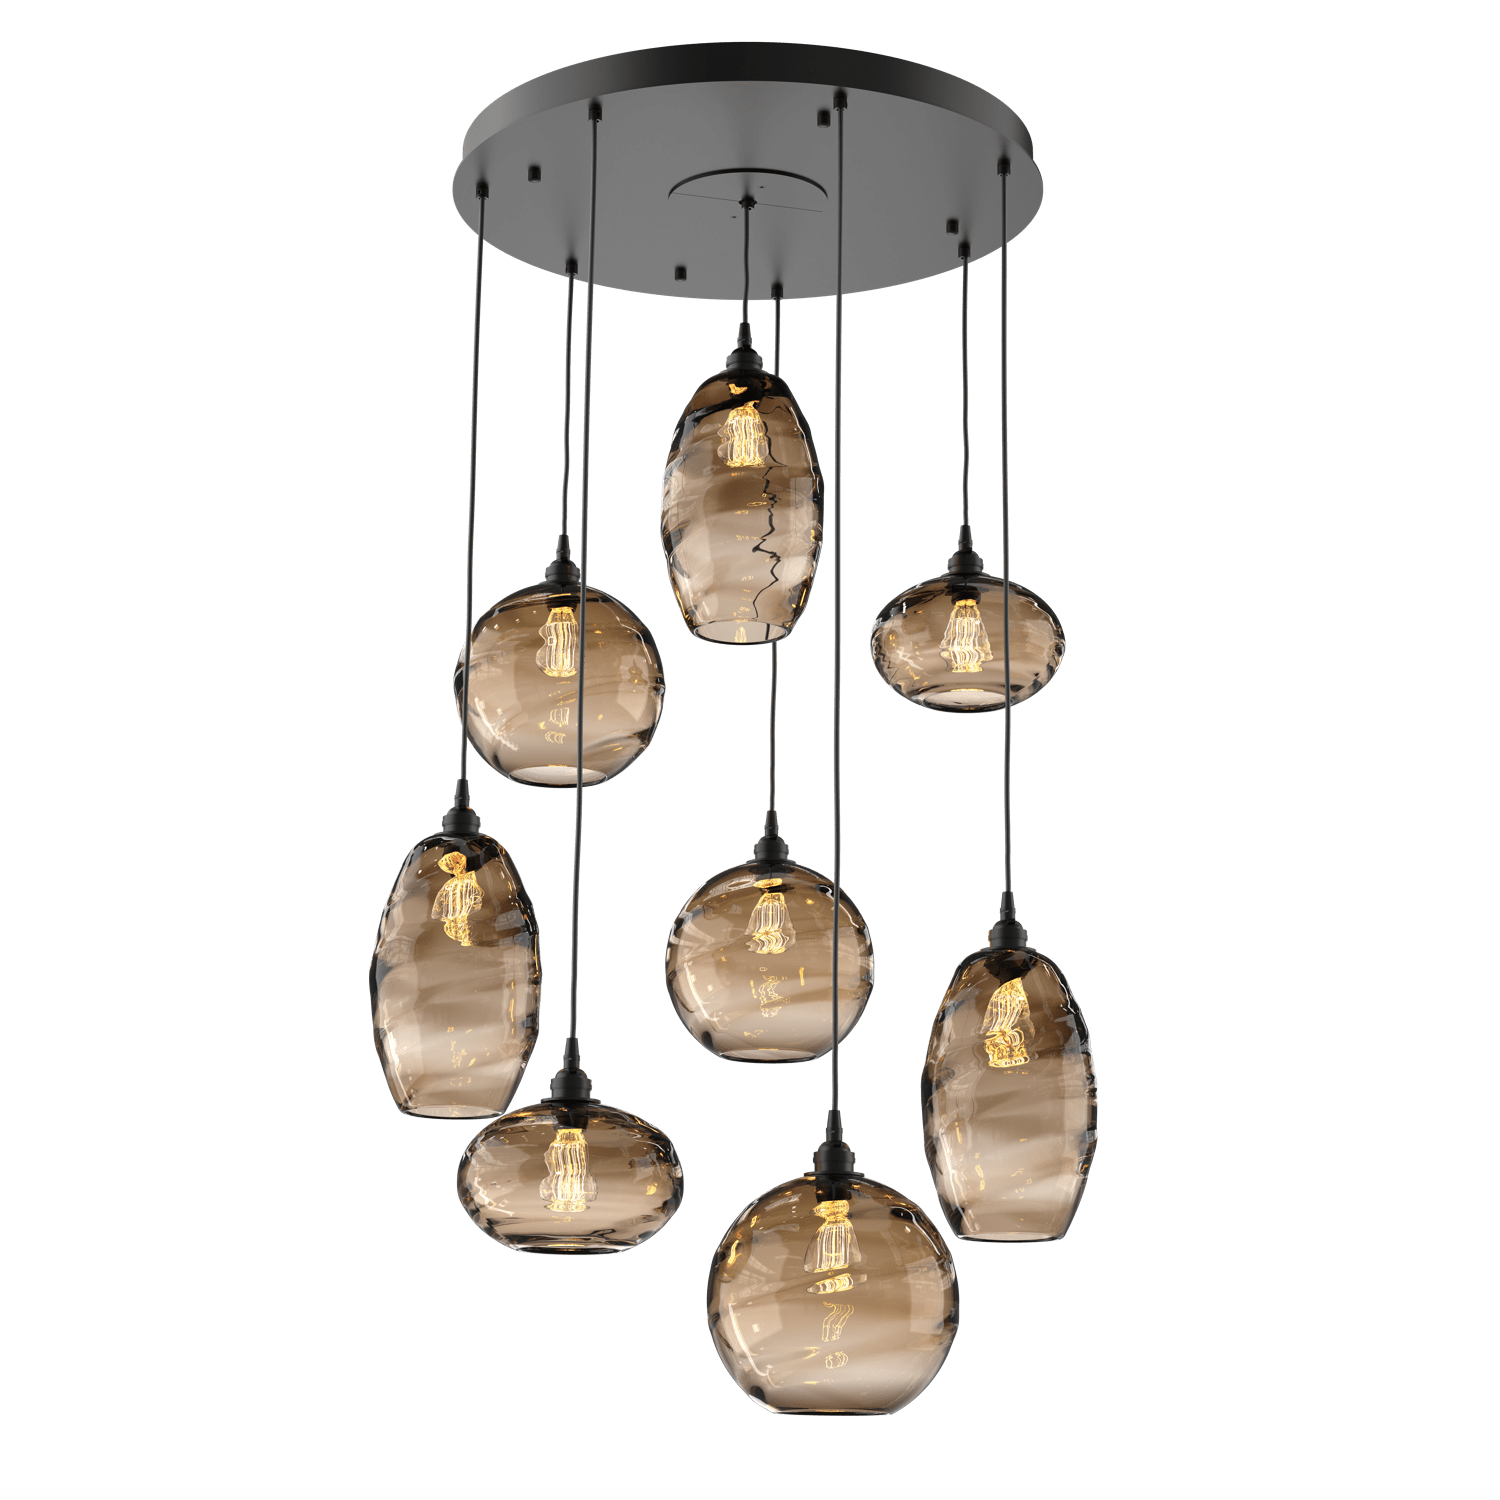 CHB0048-08-MB-OB-Hammerton-Studio-Optic-Blown-Glass-Misto-8-light-round-pendant-chandelier-with-matte-black-finish-and-optic-bronze-blown-glass-shades-and-incandescent-lamping